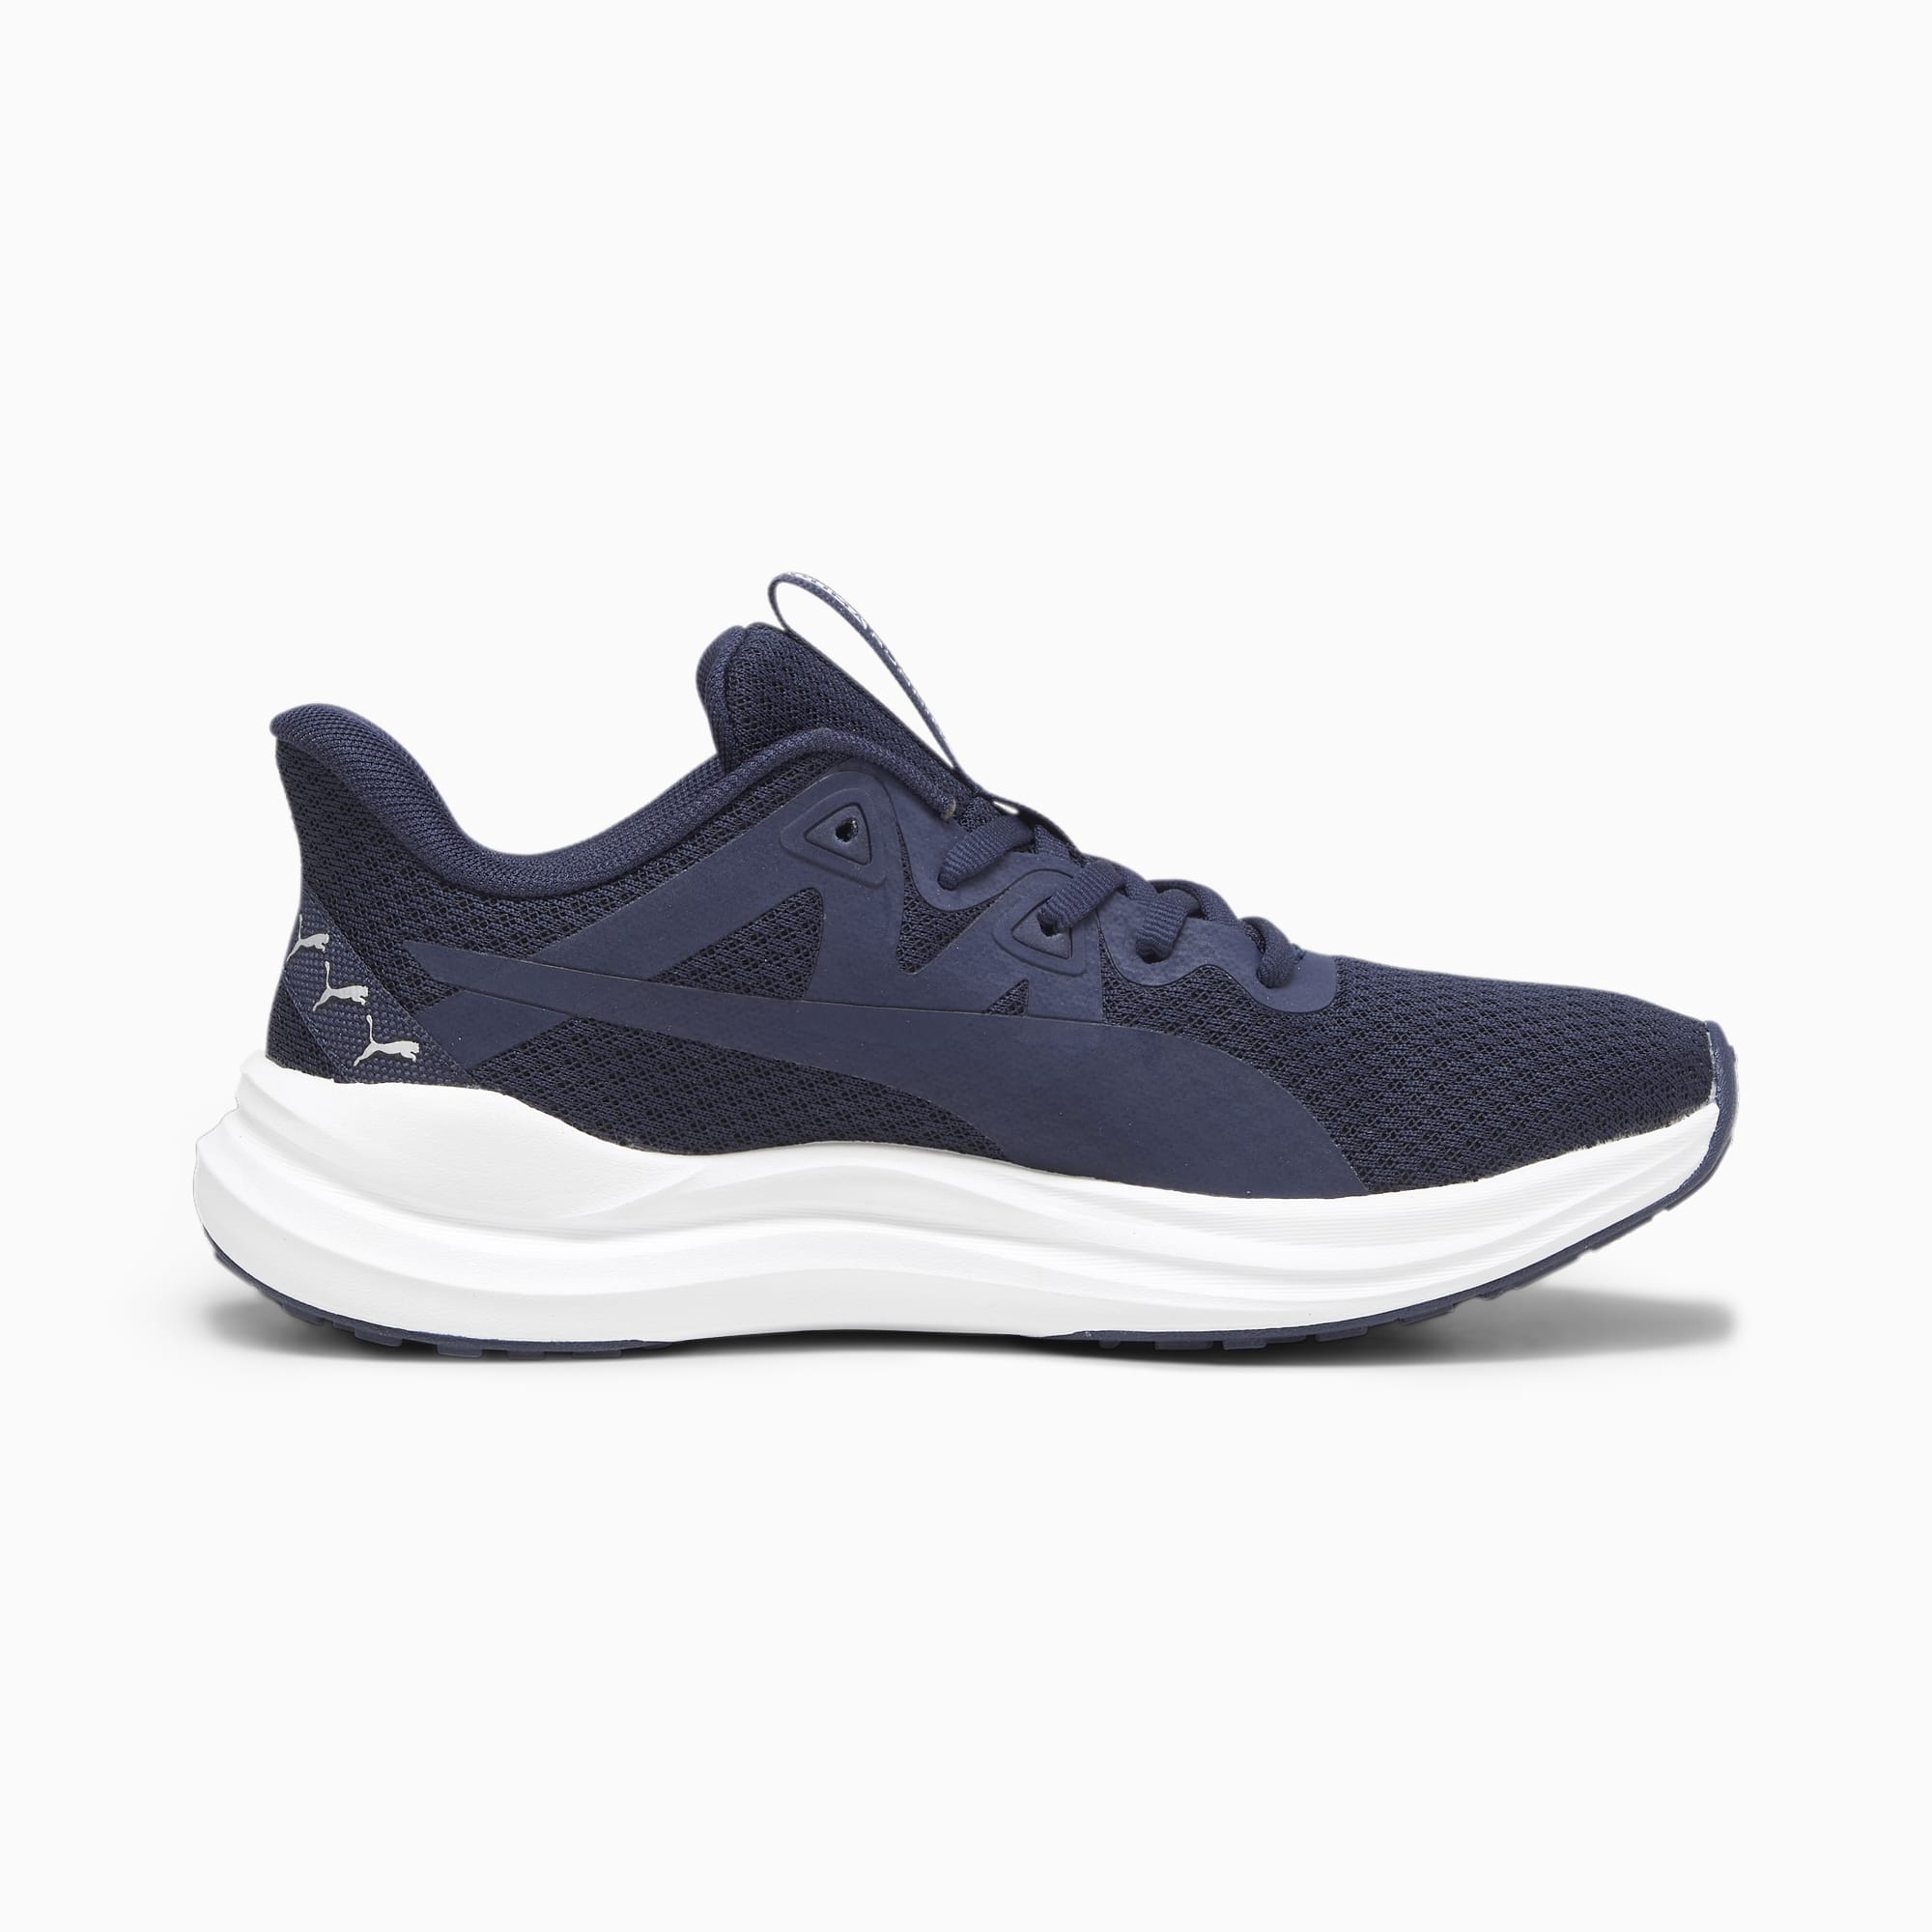 PUMA Reflect Lite Youth Running Shoes, Dark Blue, Size 35,5, Shoes